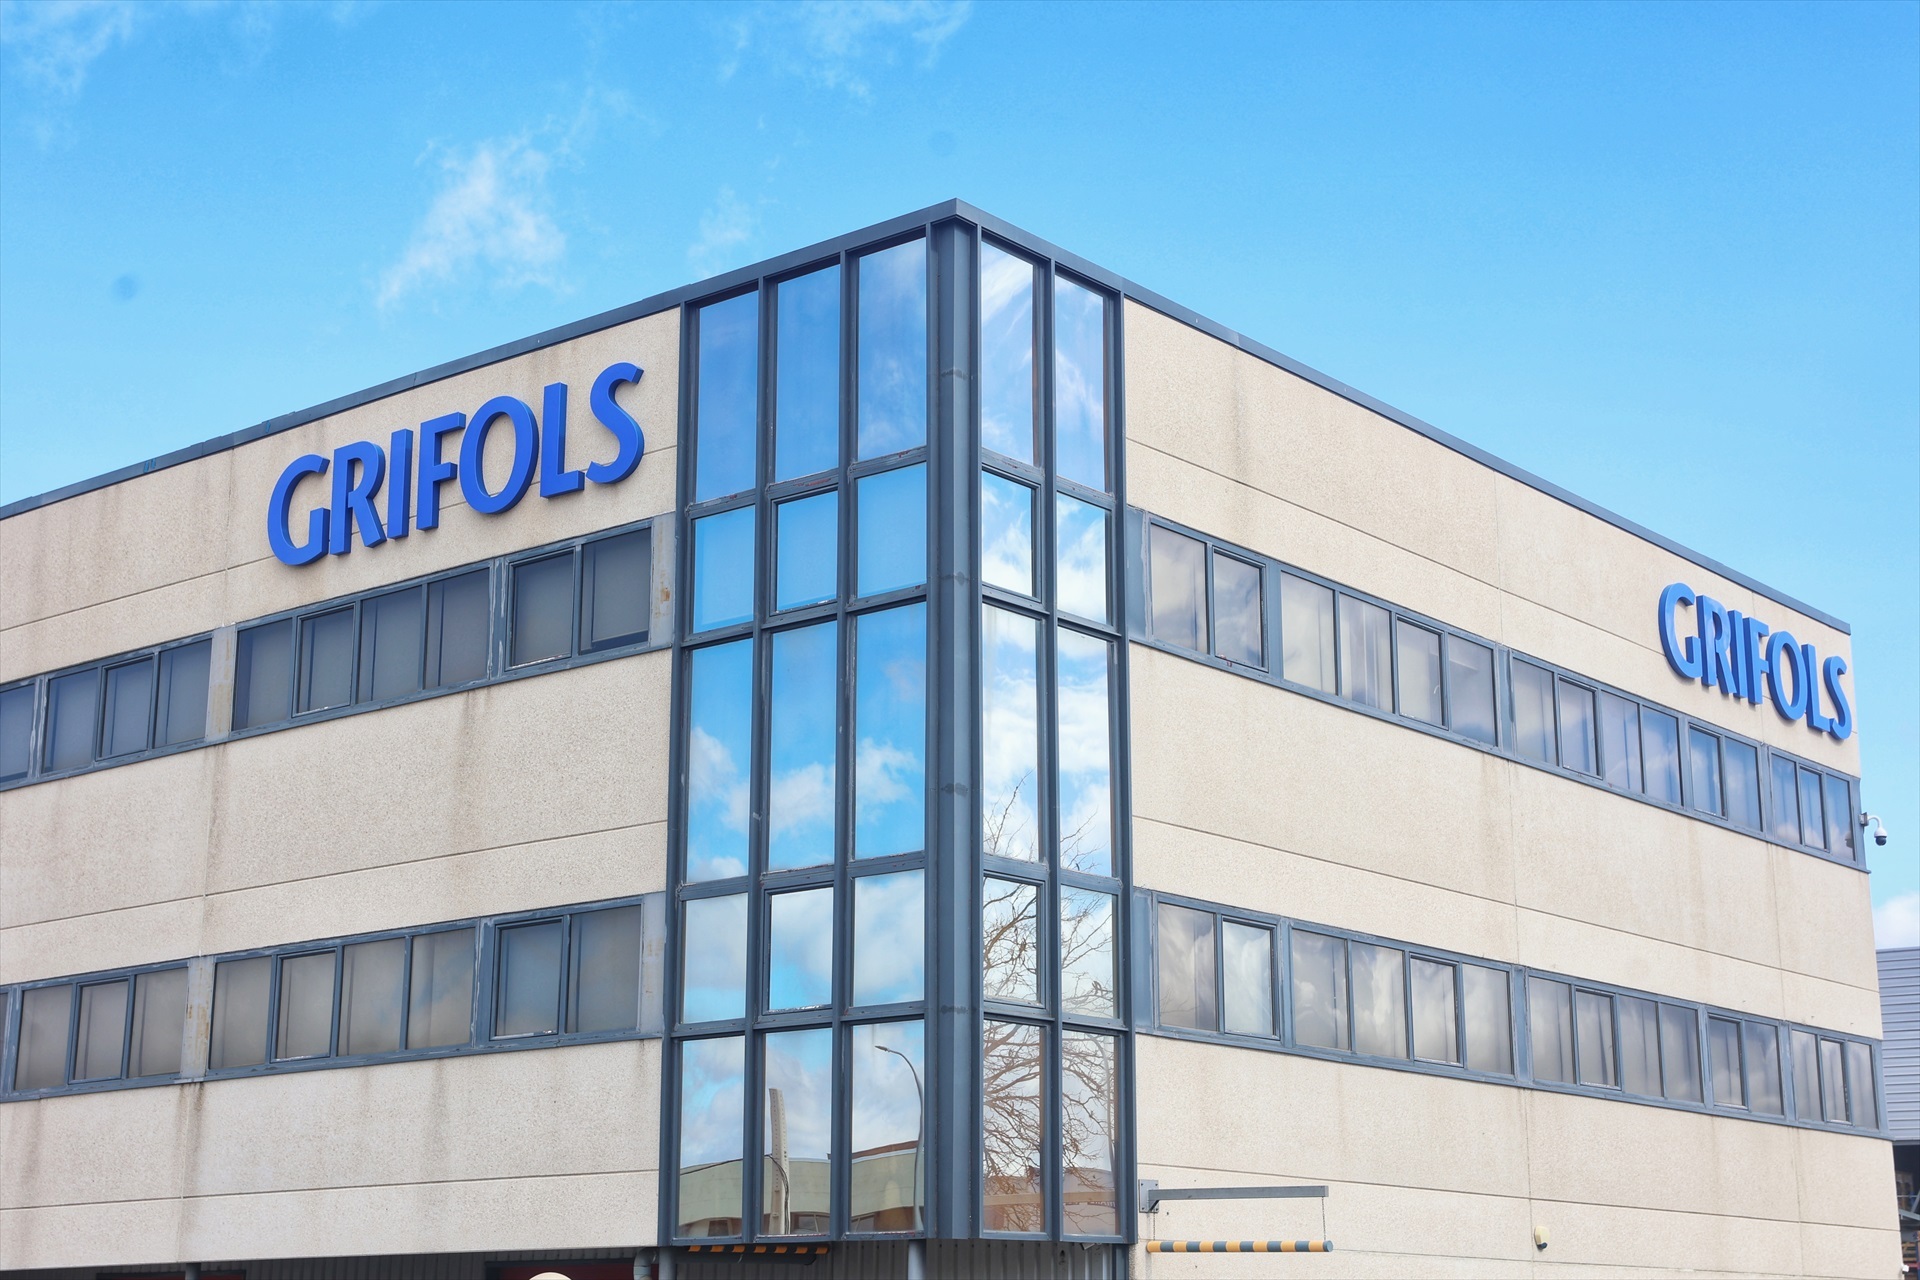 Grifols to take legal action against Gotham City fund for damage caused as shares bounce back